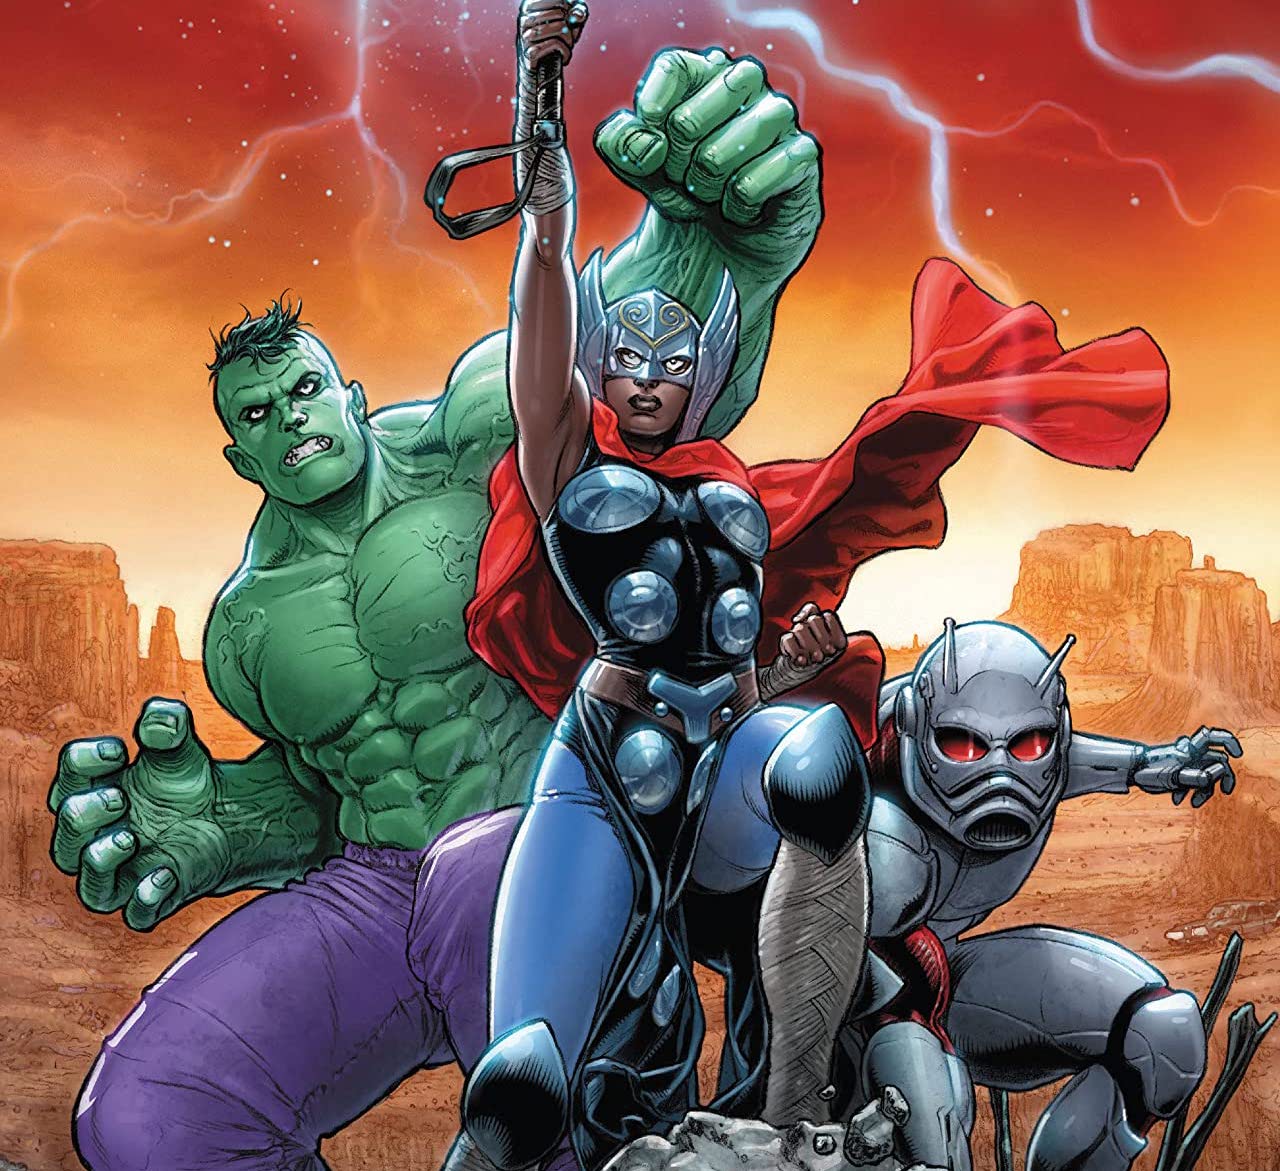 3 Reasons Why 'Avengers of the Wastelands' is an inspiring story of hope